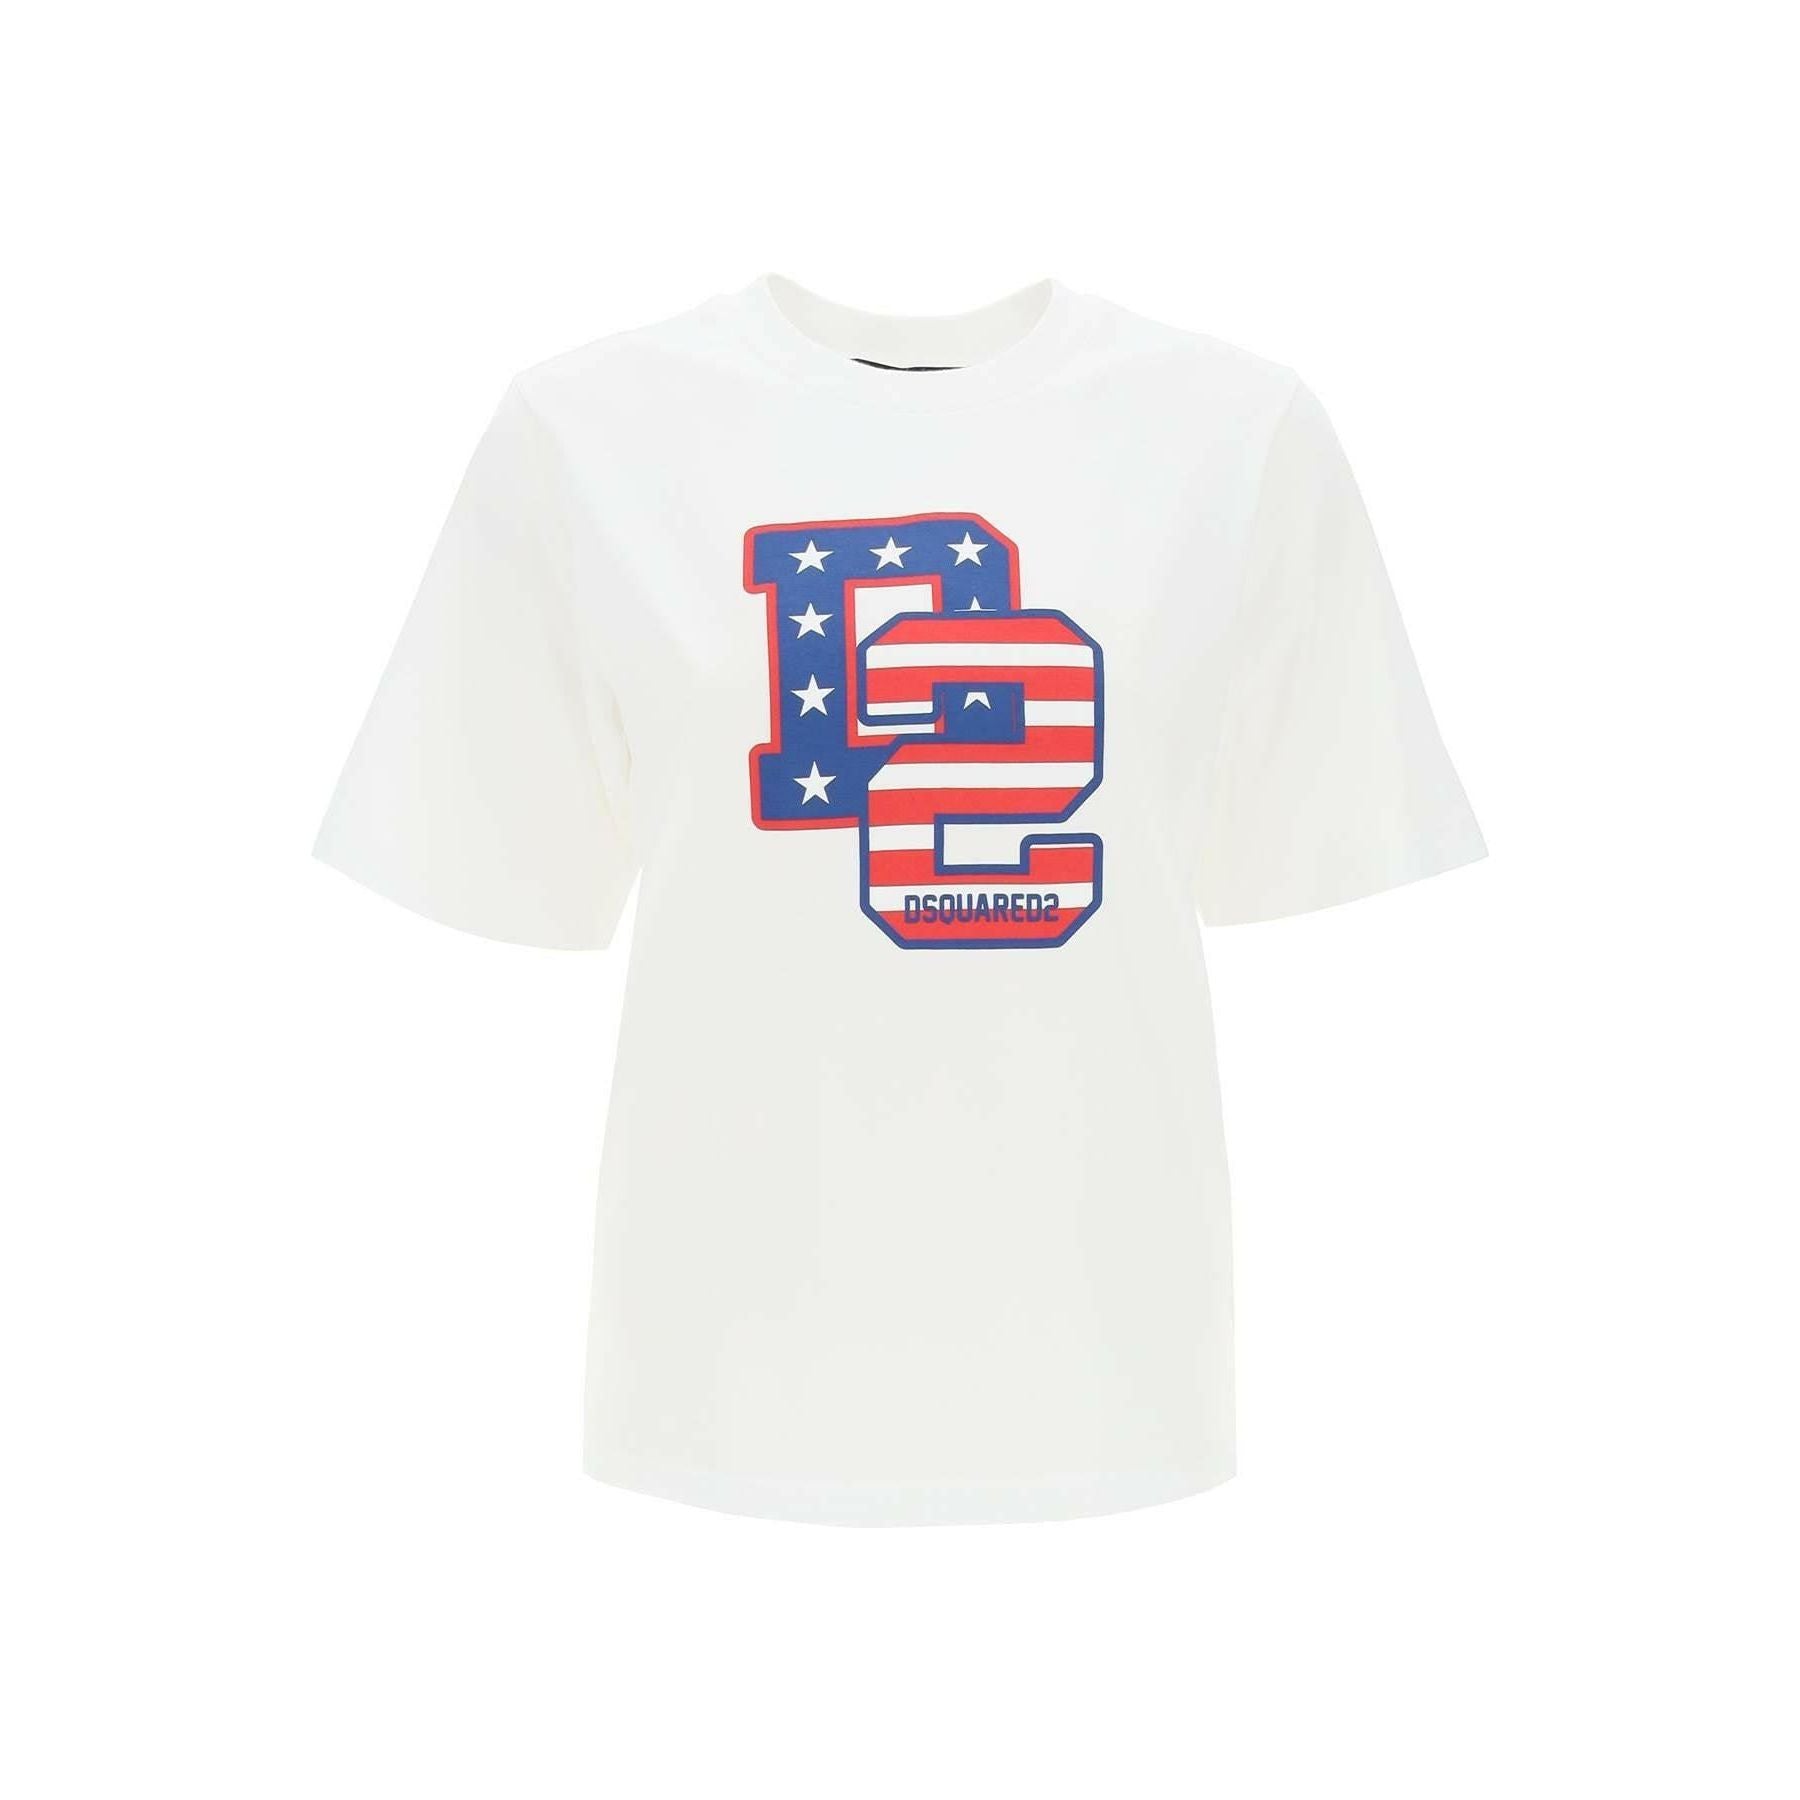 Easy Fit T-Shirt With Graphic Print DSQUARED2 JOHN JULIA.